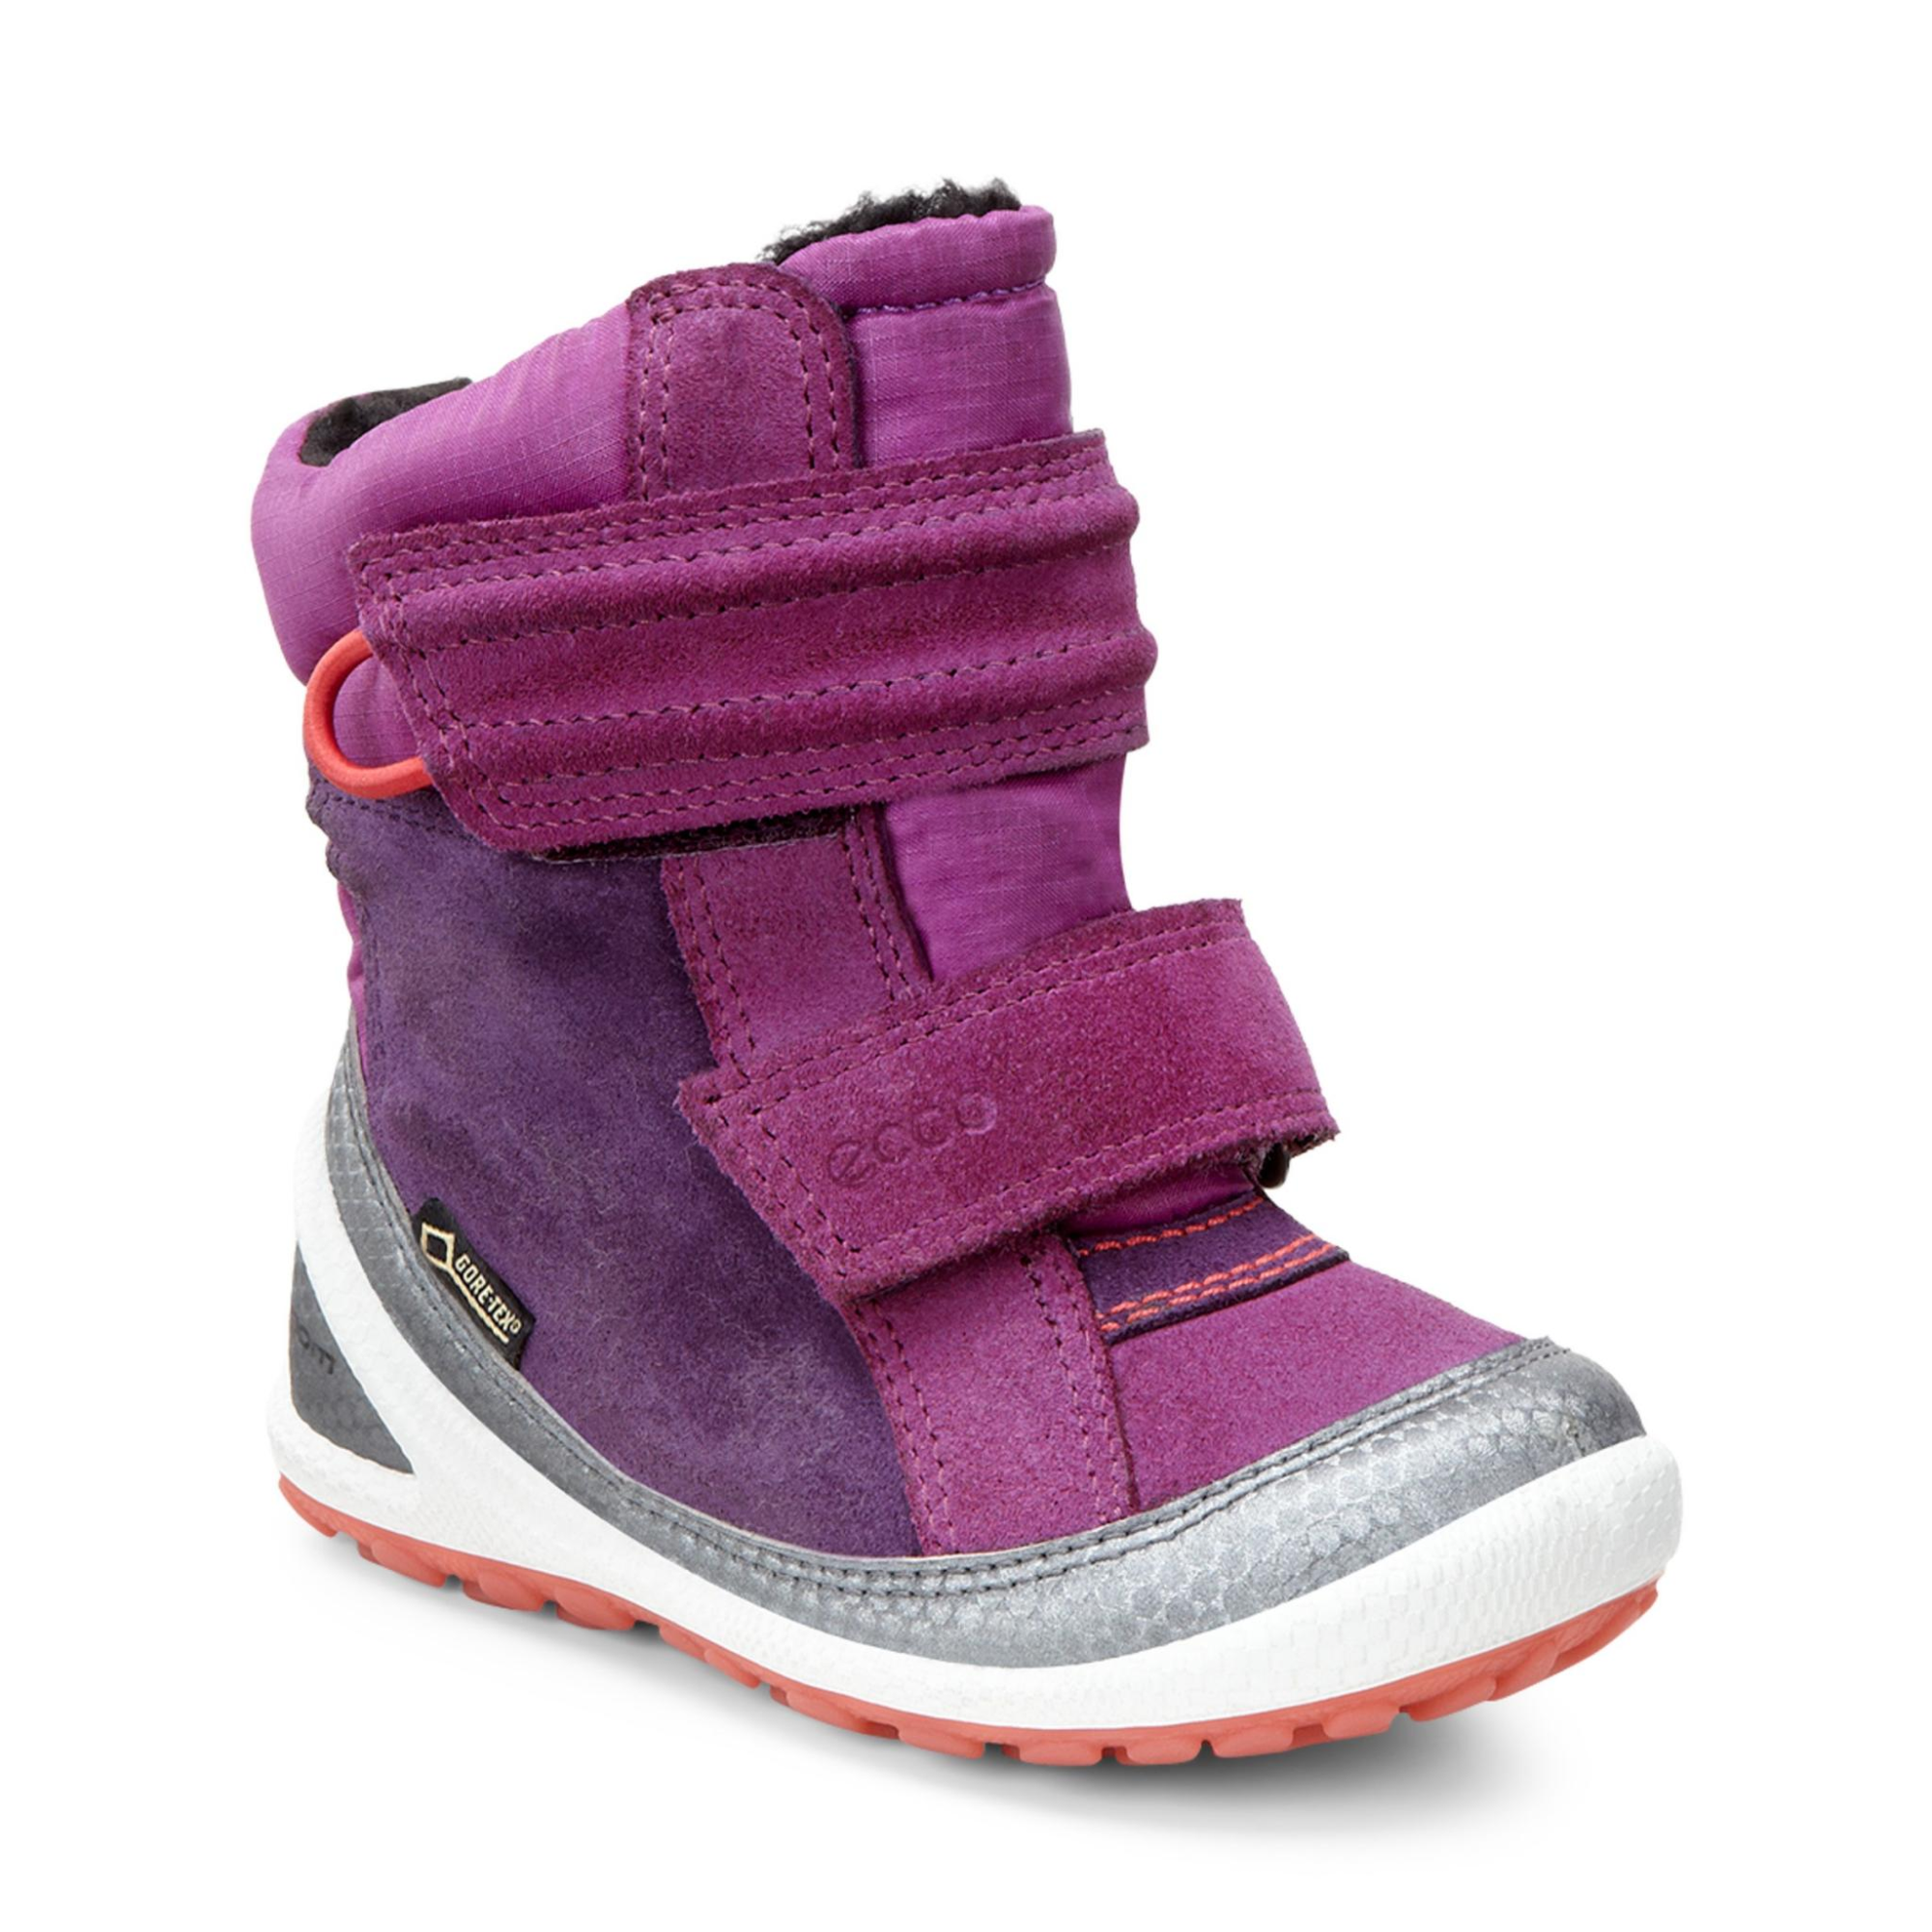 Transcend Motivere låg Ecco BIOM Lite Infant Boot 23 - Products - Veryk Mall - Veryk Mall, many  product, quick response, safe your money!